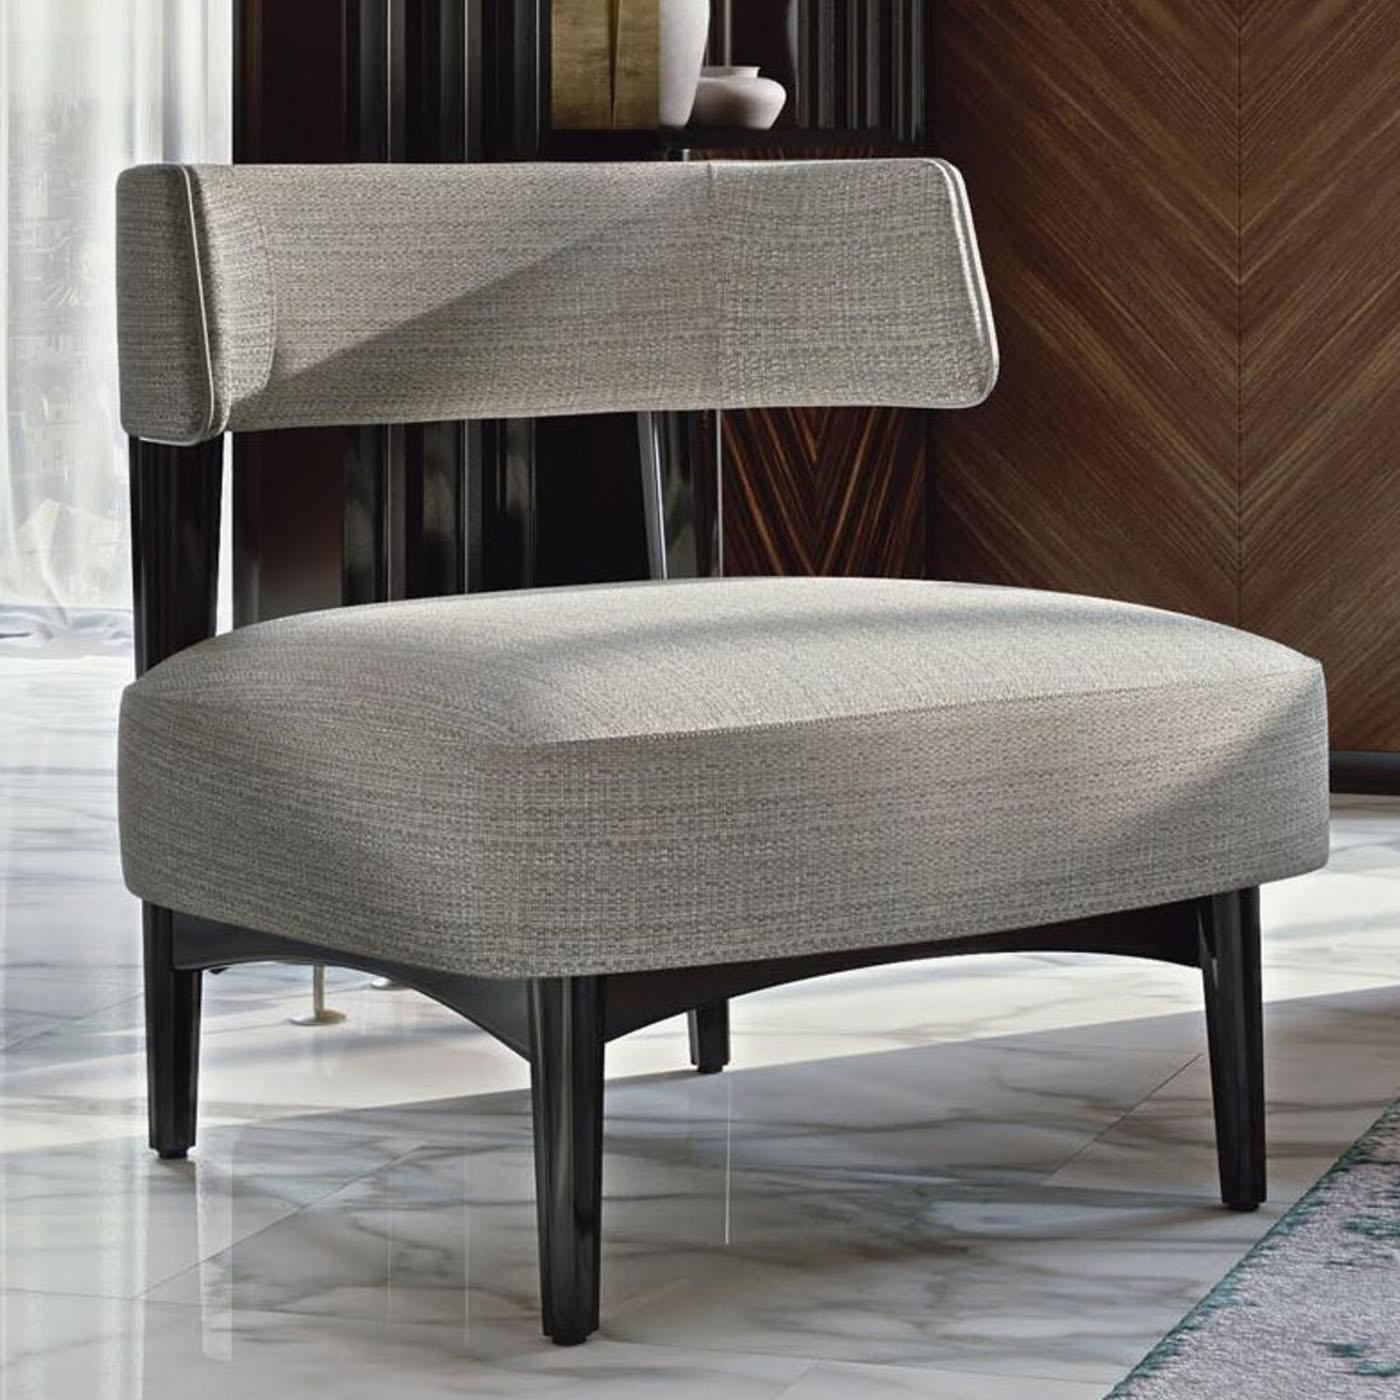 The perfect spot to relax in the company of a good glass of wine by the fireplace in a modern home, this lounge chair masterfully couples elegance and simplicity. The linear beech structure comes offered in a deep gray shade that well harmonizes